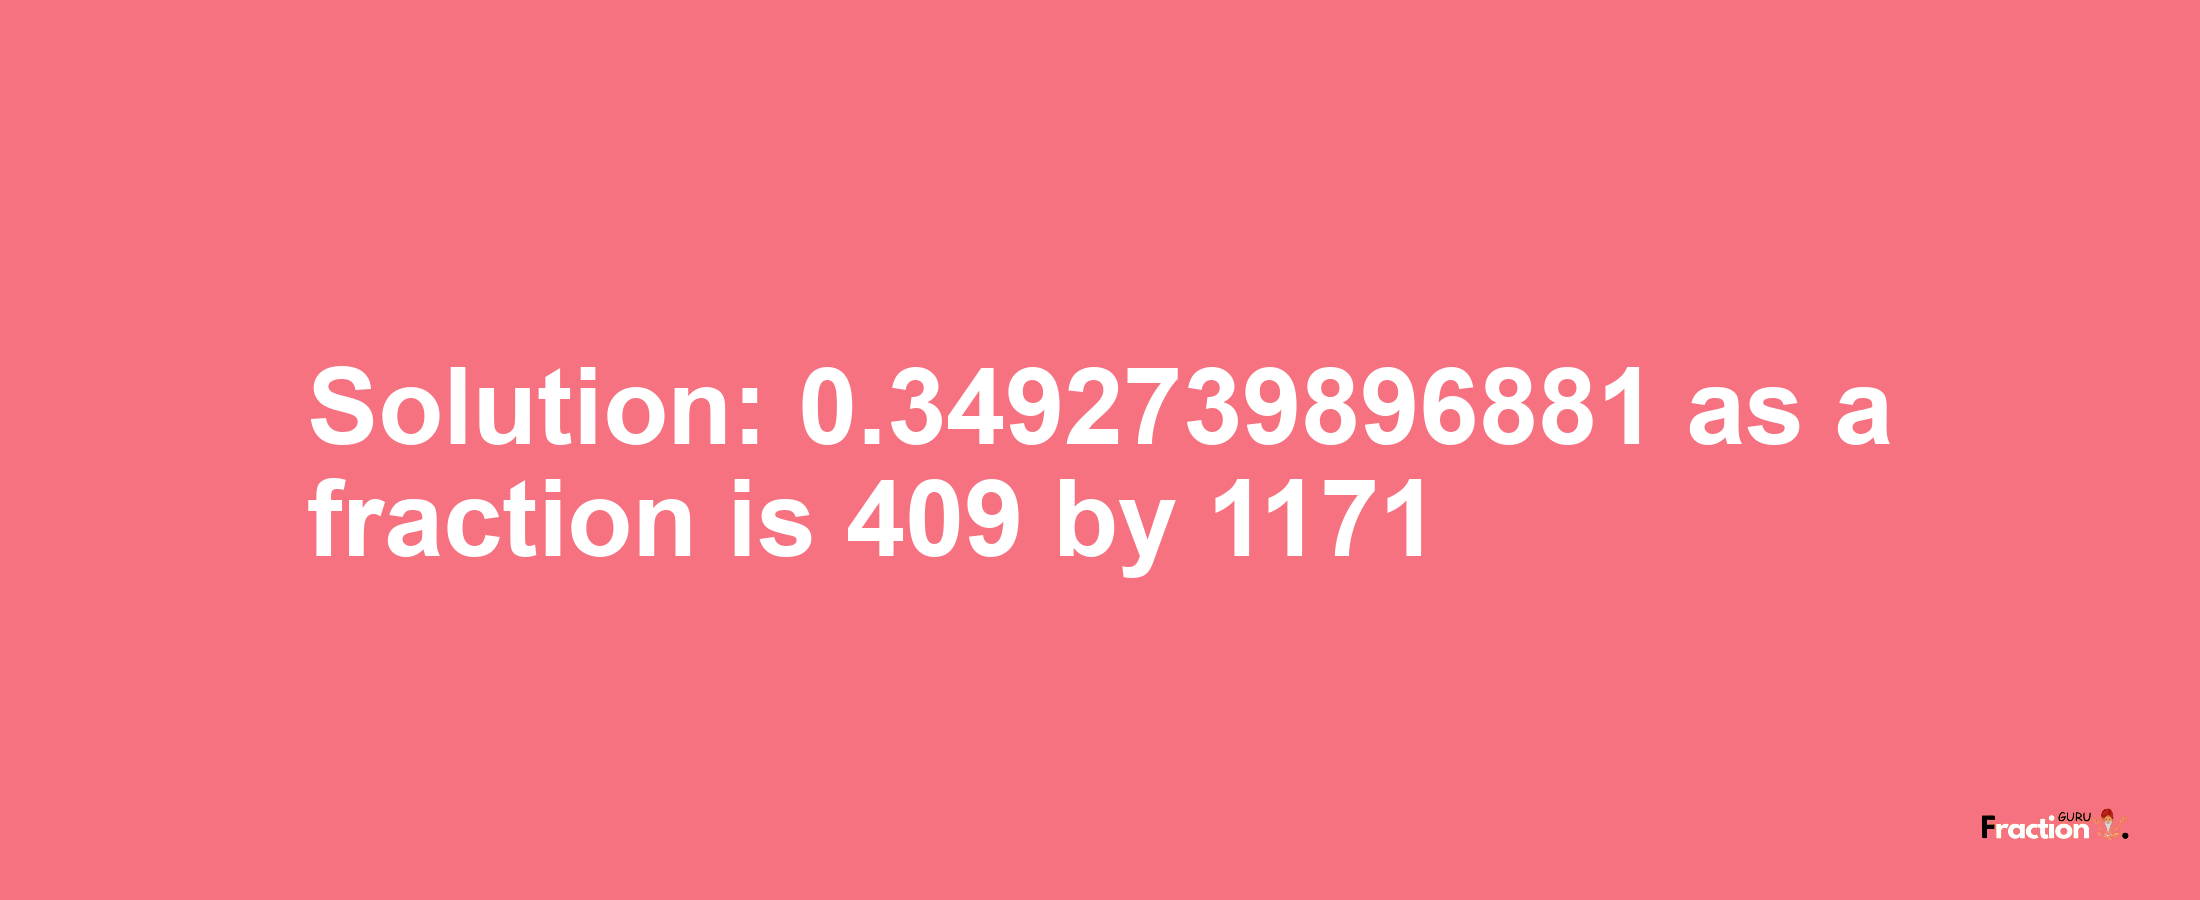 Solution:0.3492739896881 as a fraction is 409/1171